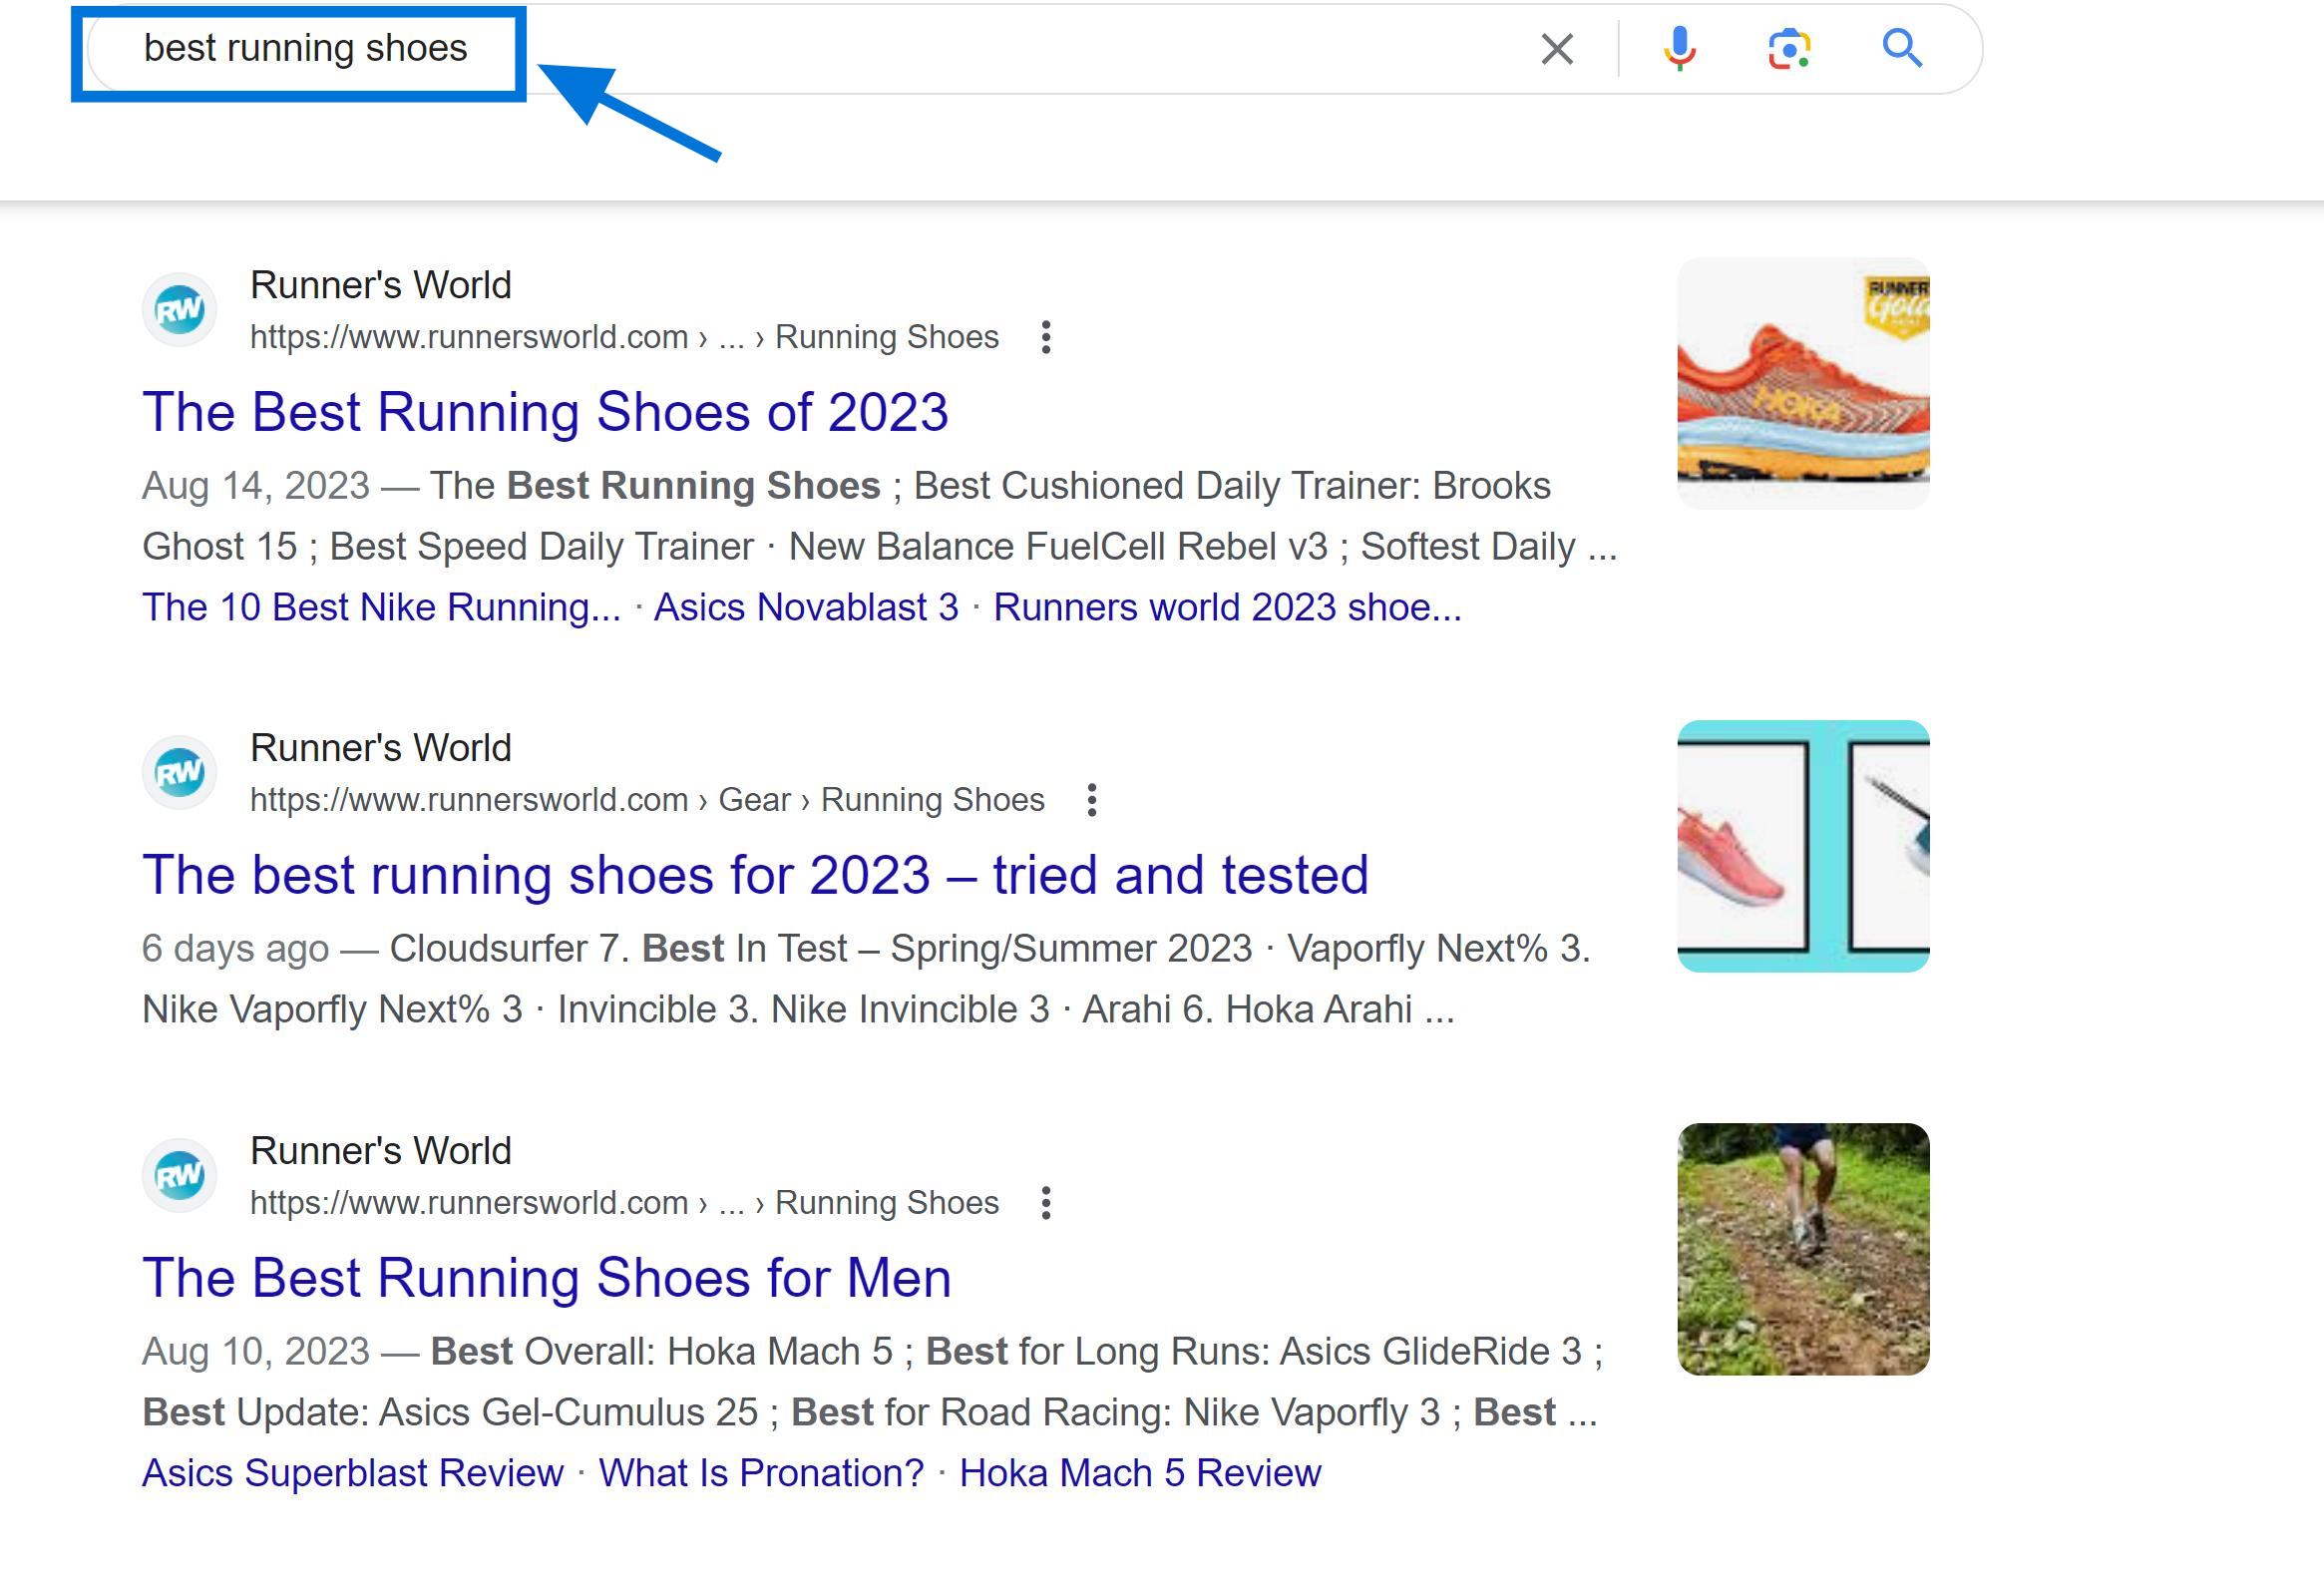 Search Results Example "Best Running Shoes"